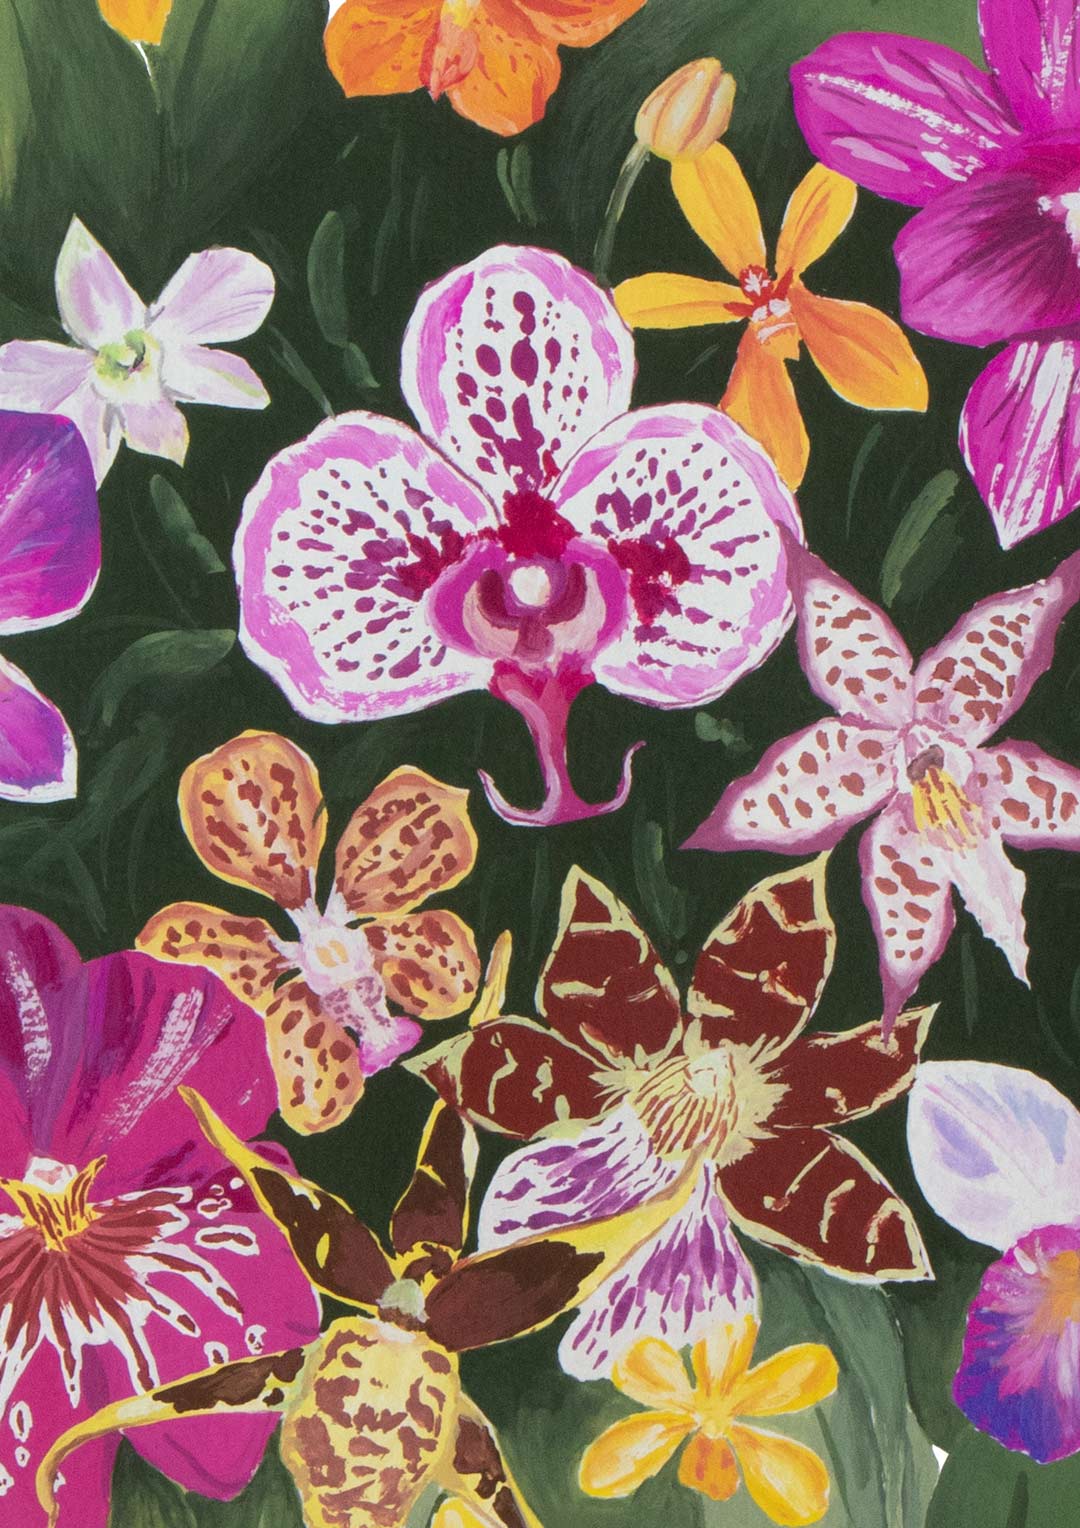 The Orchid Garden - Archival Print